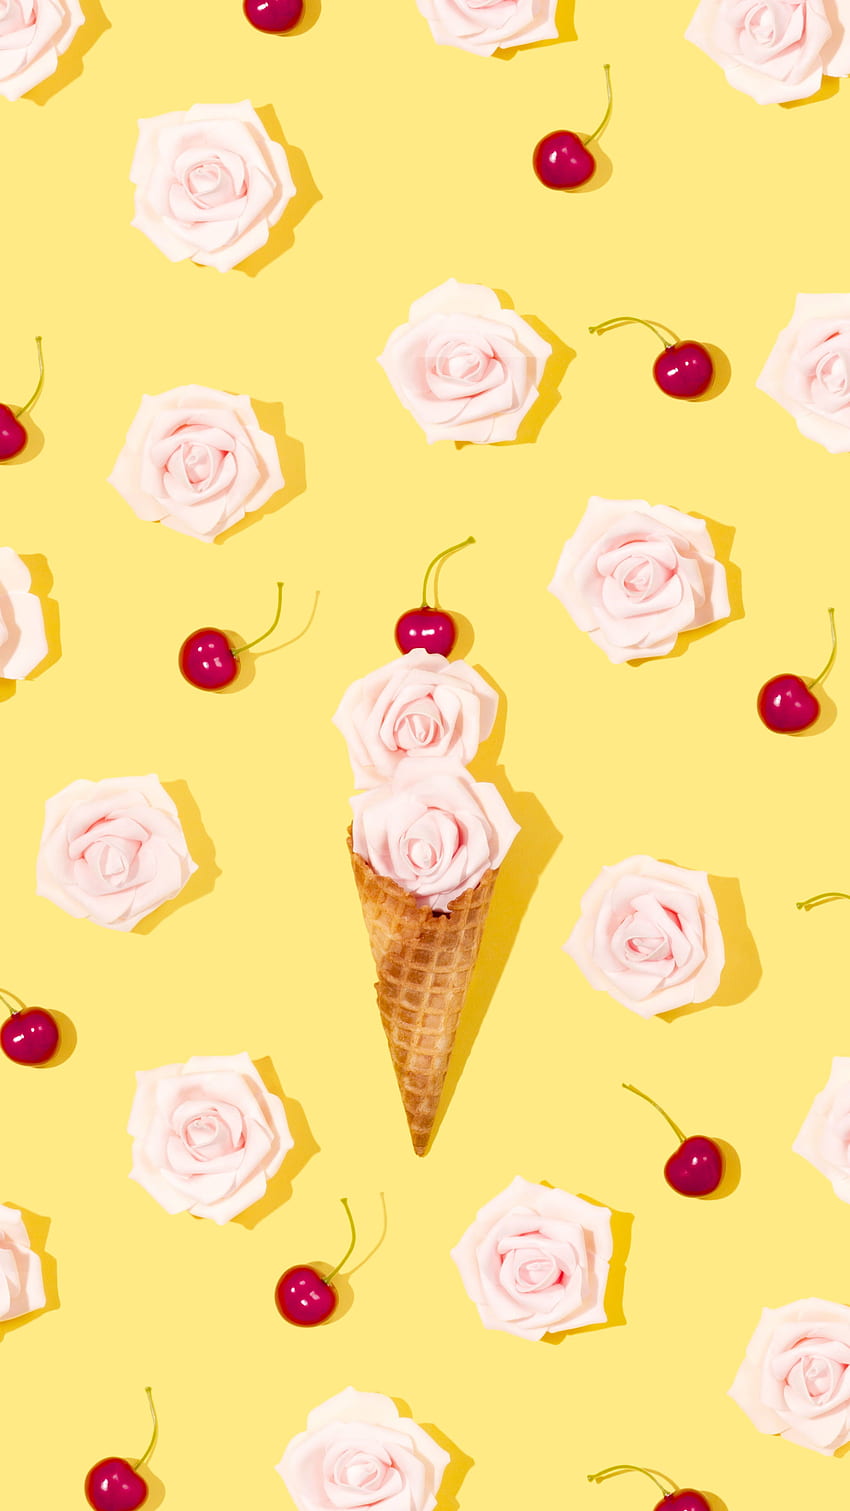 Roses, Cherries, & Ice Cream . Amy Shamblen, Art Direction graphy, Art Direction Advertising, Col. iPhone , Flower , Flower ice, Ice Cream Colorful Summer HD phone wallpaper